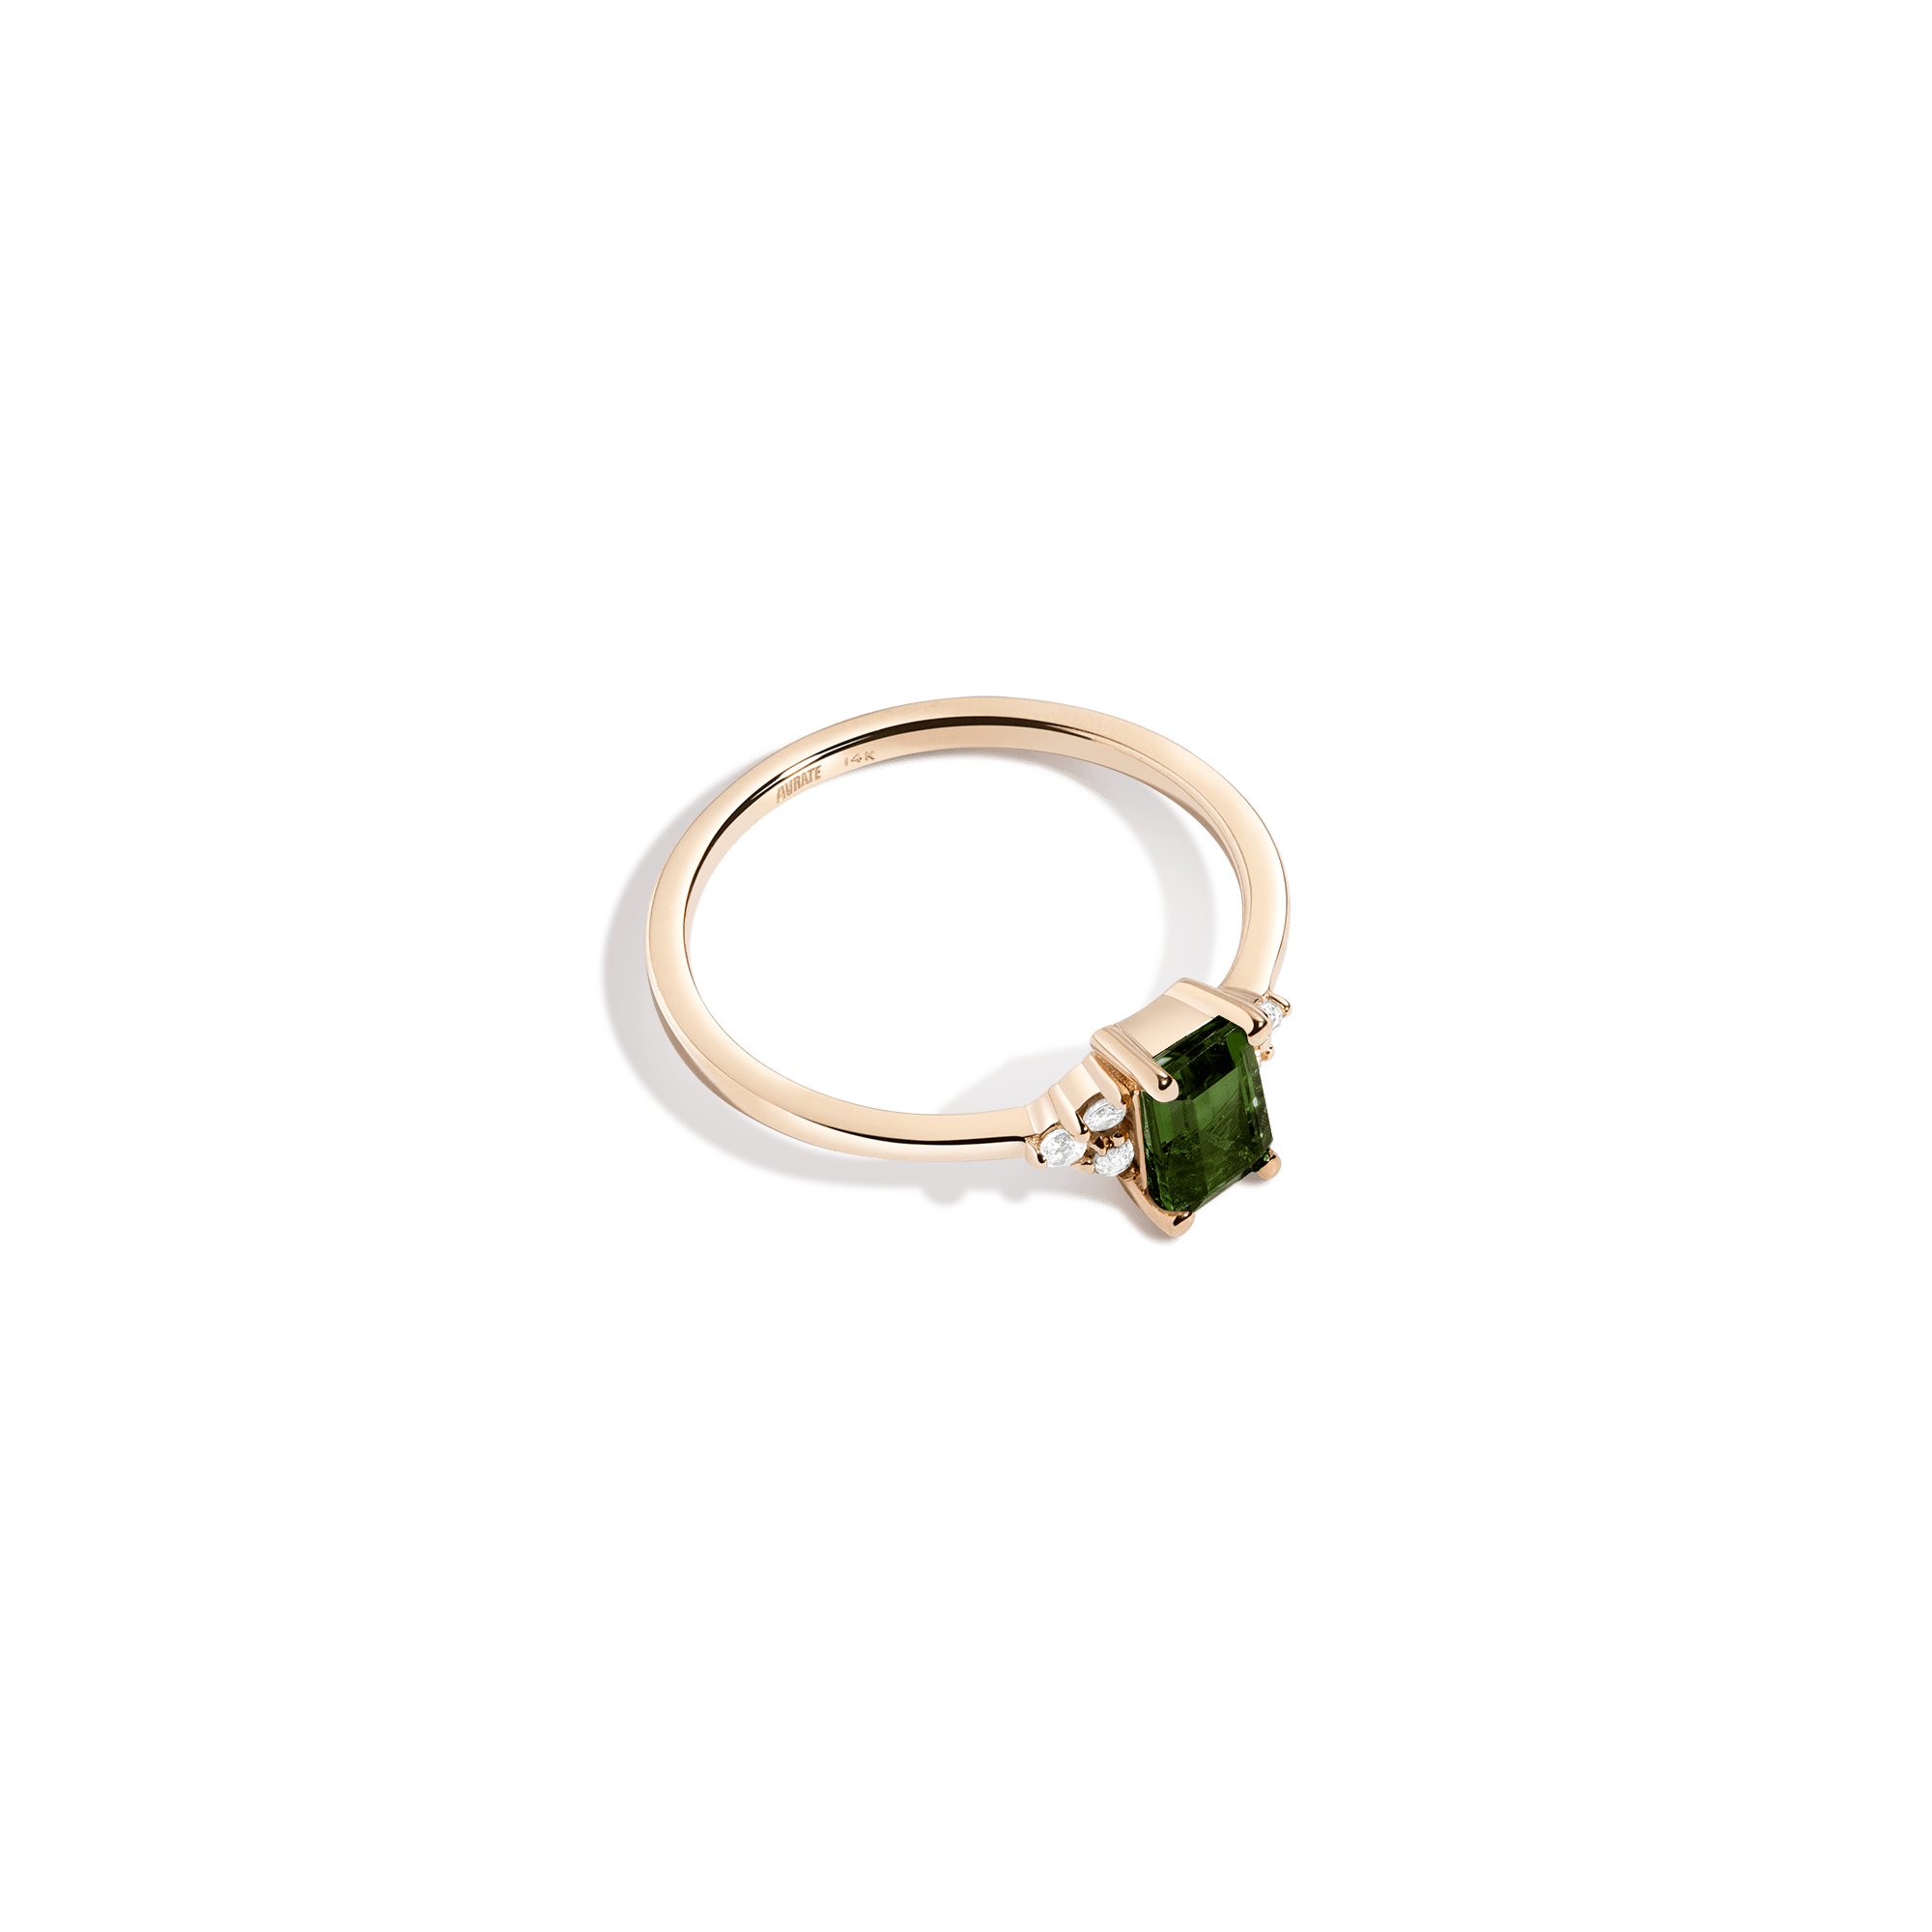 Vintage Emerald Cut Ring in Yellow, Rose or White Gold